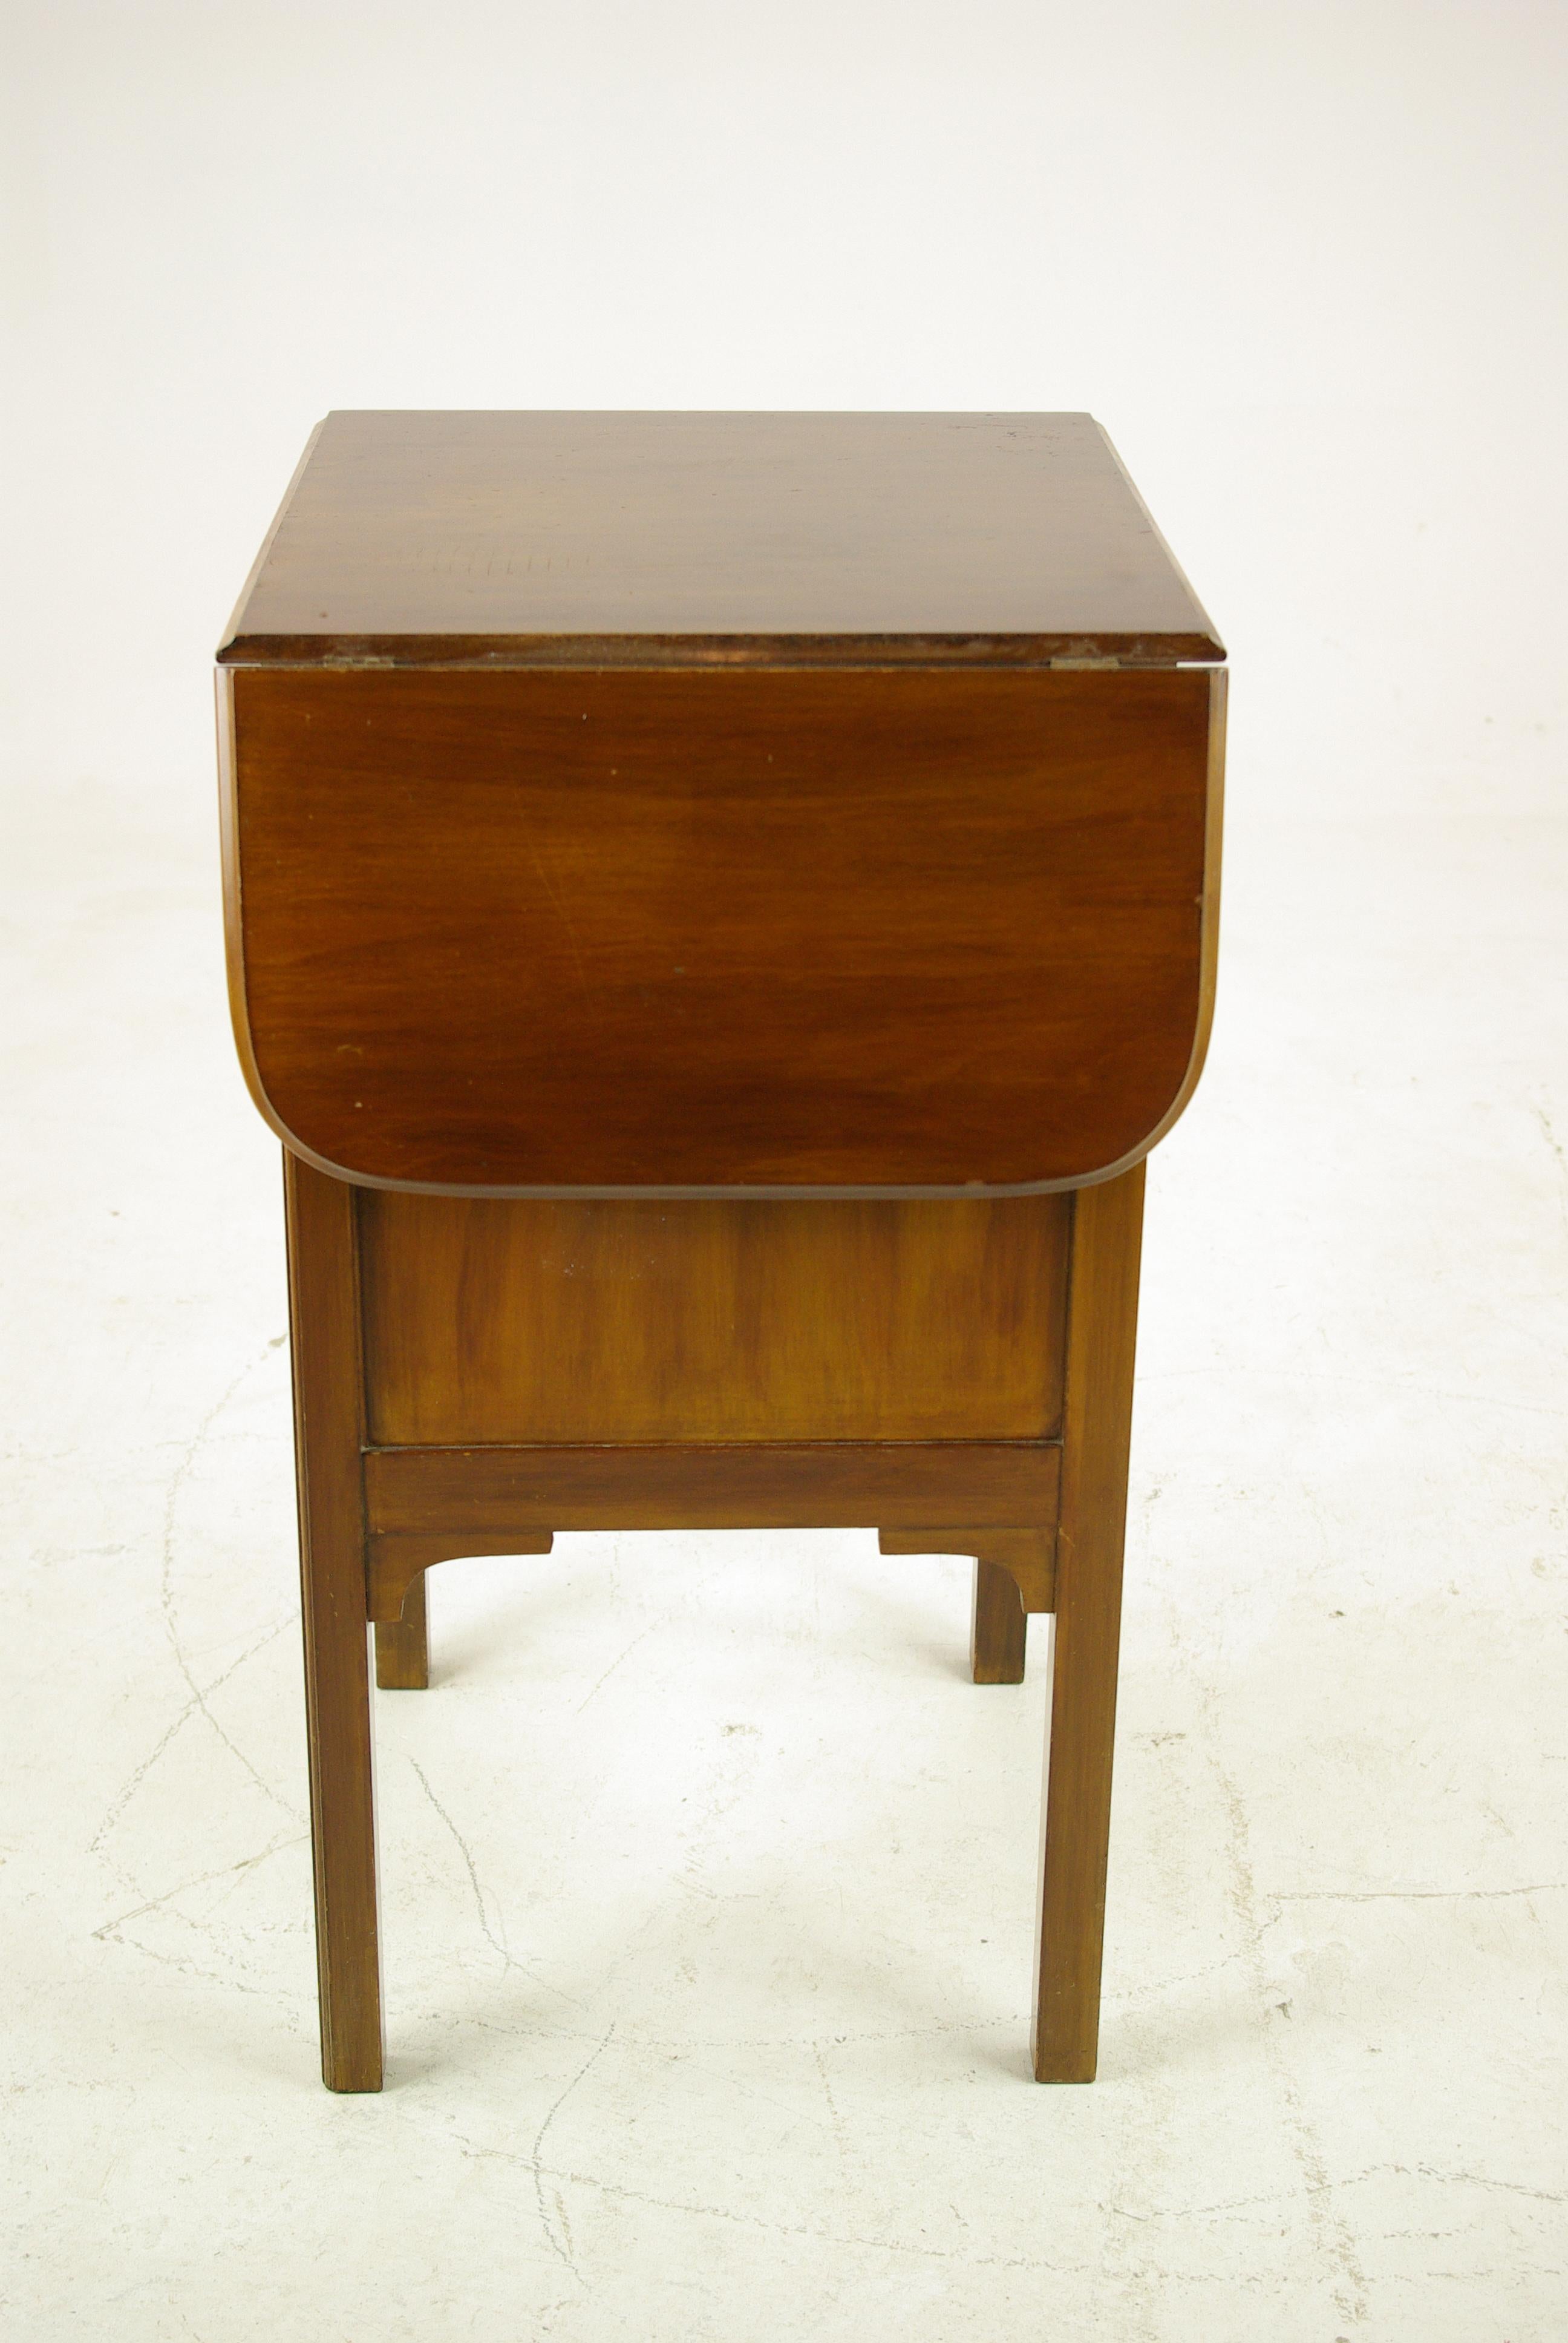 Vintage Walnut Nightstand, Lamp Table with Drop Leaves, Scotland 1930, H029 2